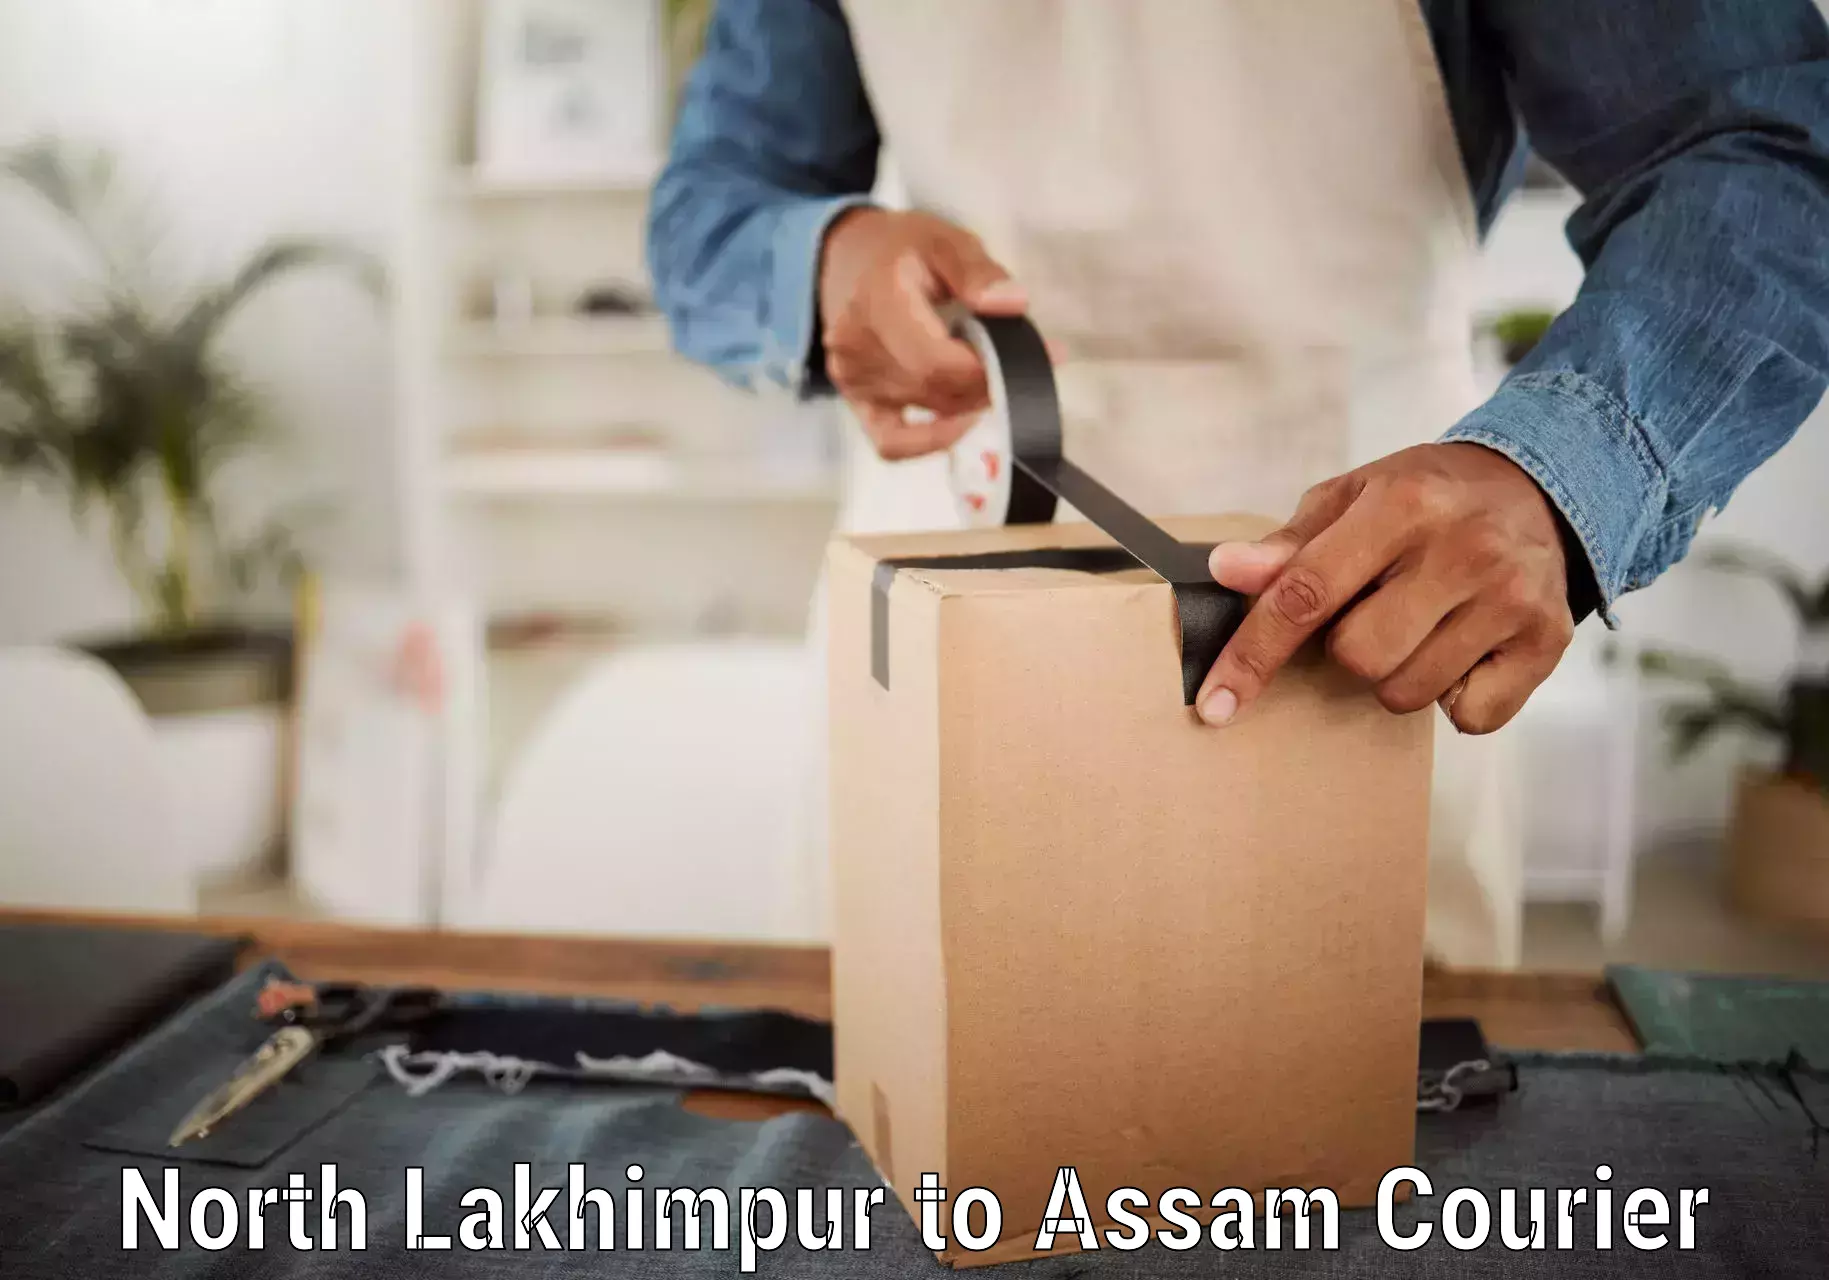 On-call courier service North Lakhimpur to Udalguri